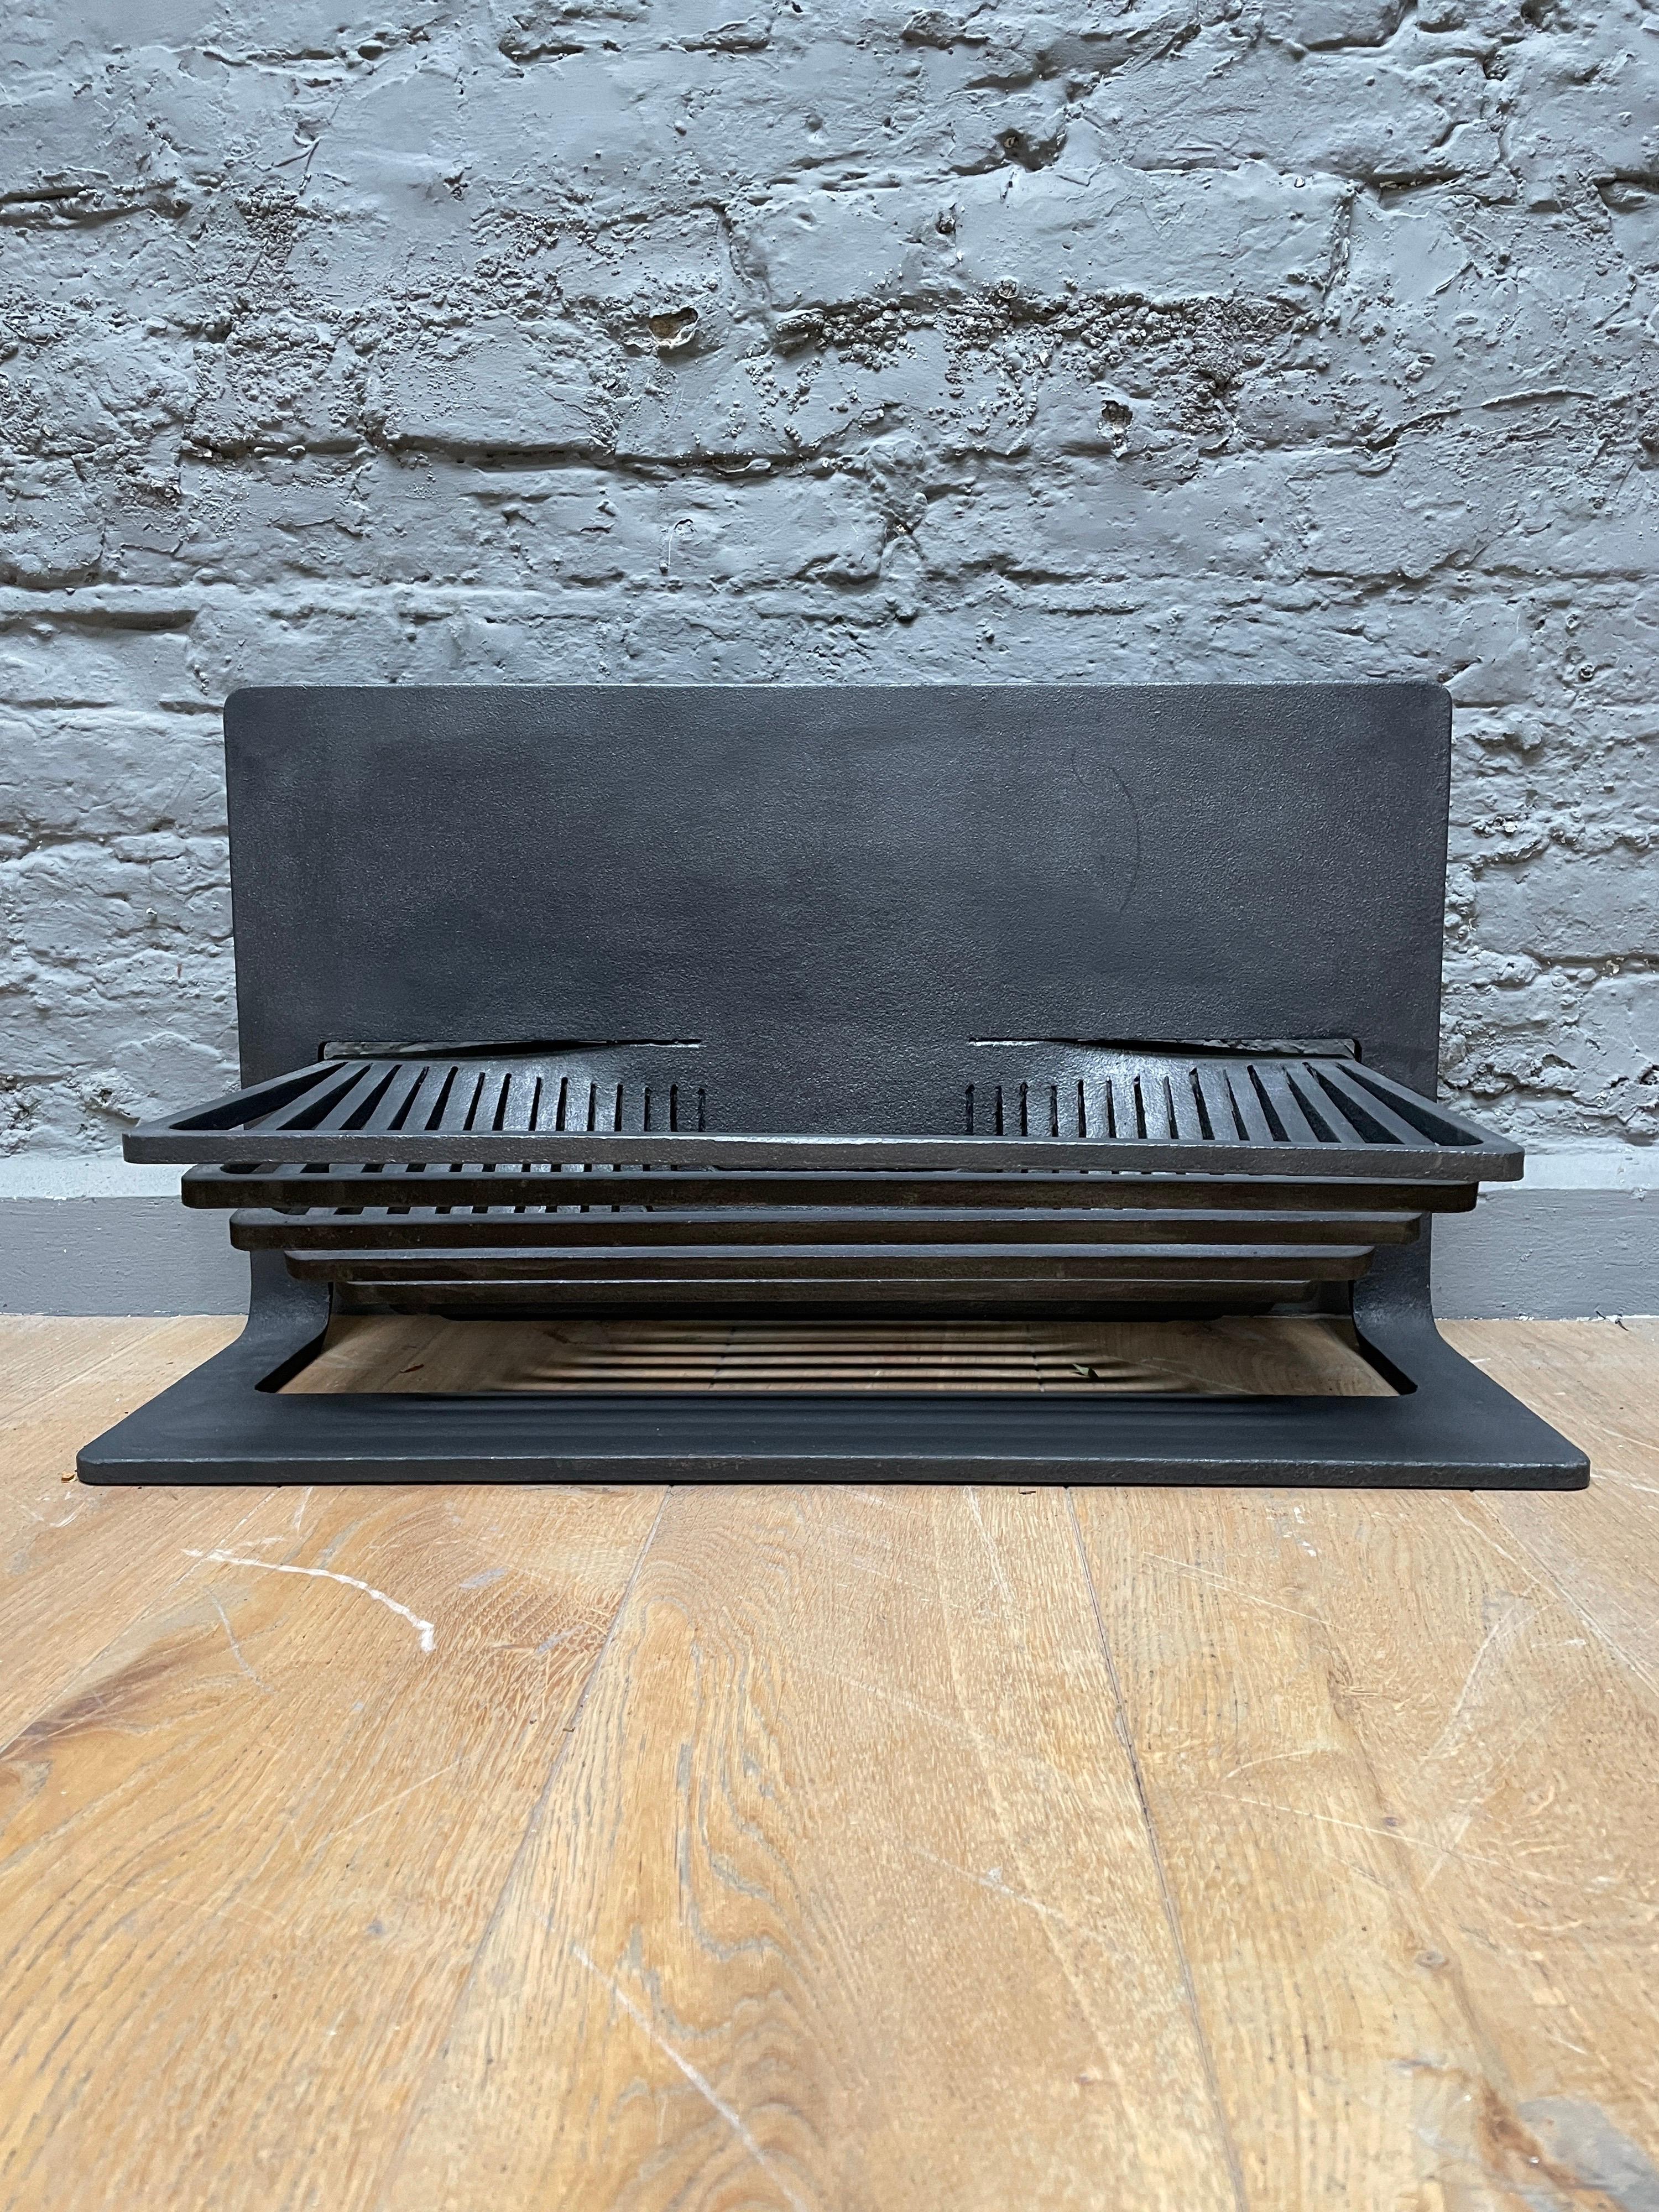 A laser cut fire basket/grate by Stuart Hill. Very similar to the one in the V&A museum London. Cut and made from one piece of steel.